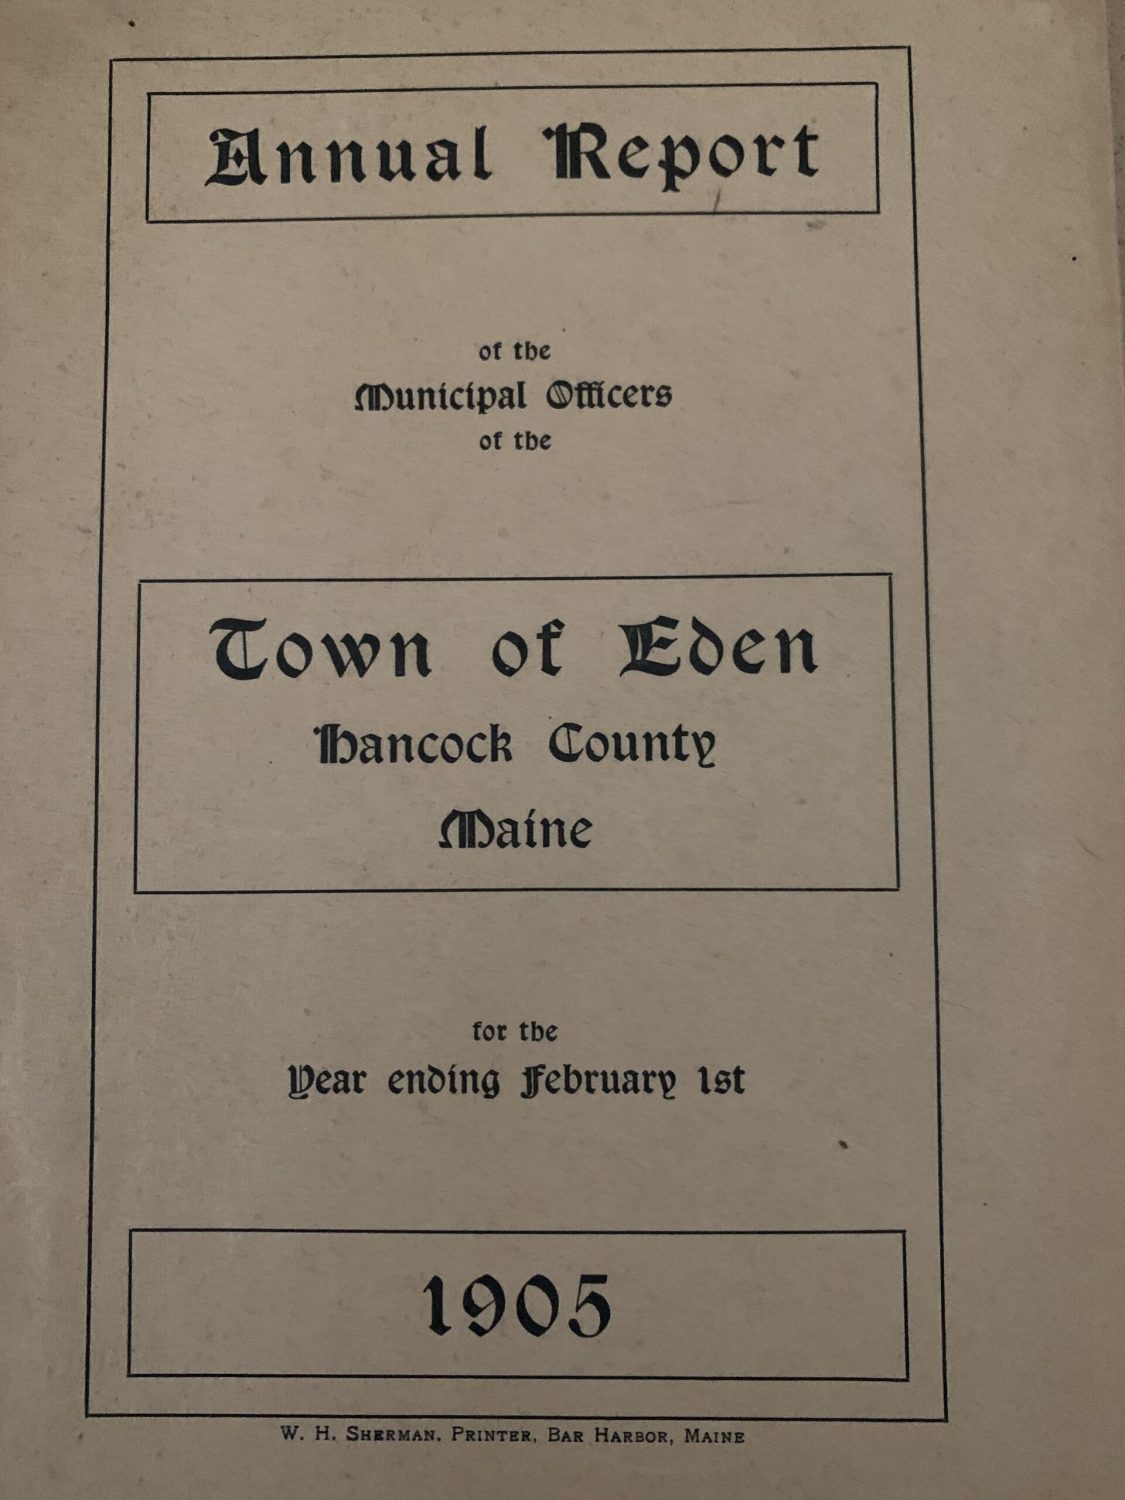 Photo of the cover of the Town of Eden's (now  Bar Harbor) annual report for 1905. It reads: "Annual Report of the Municipal Officers of the Town of Eden, Hancock County, Maine, for the year ending February 1st, 1905." At the bottom of the picture it reads: "W. H. Sherman, Printer. Bar Harbor, Maine." 